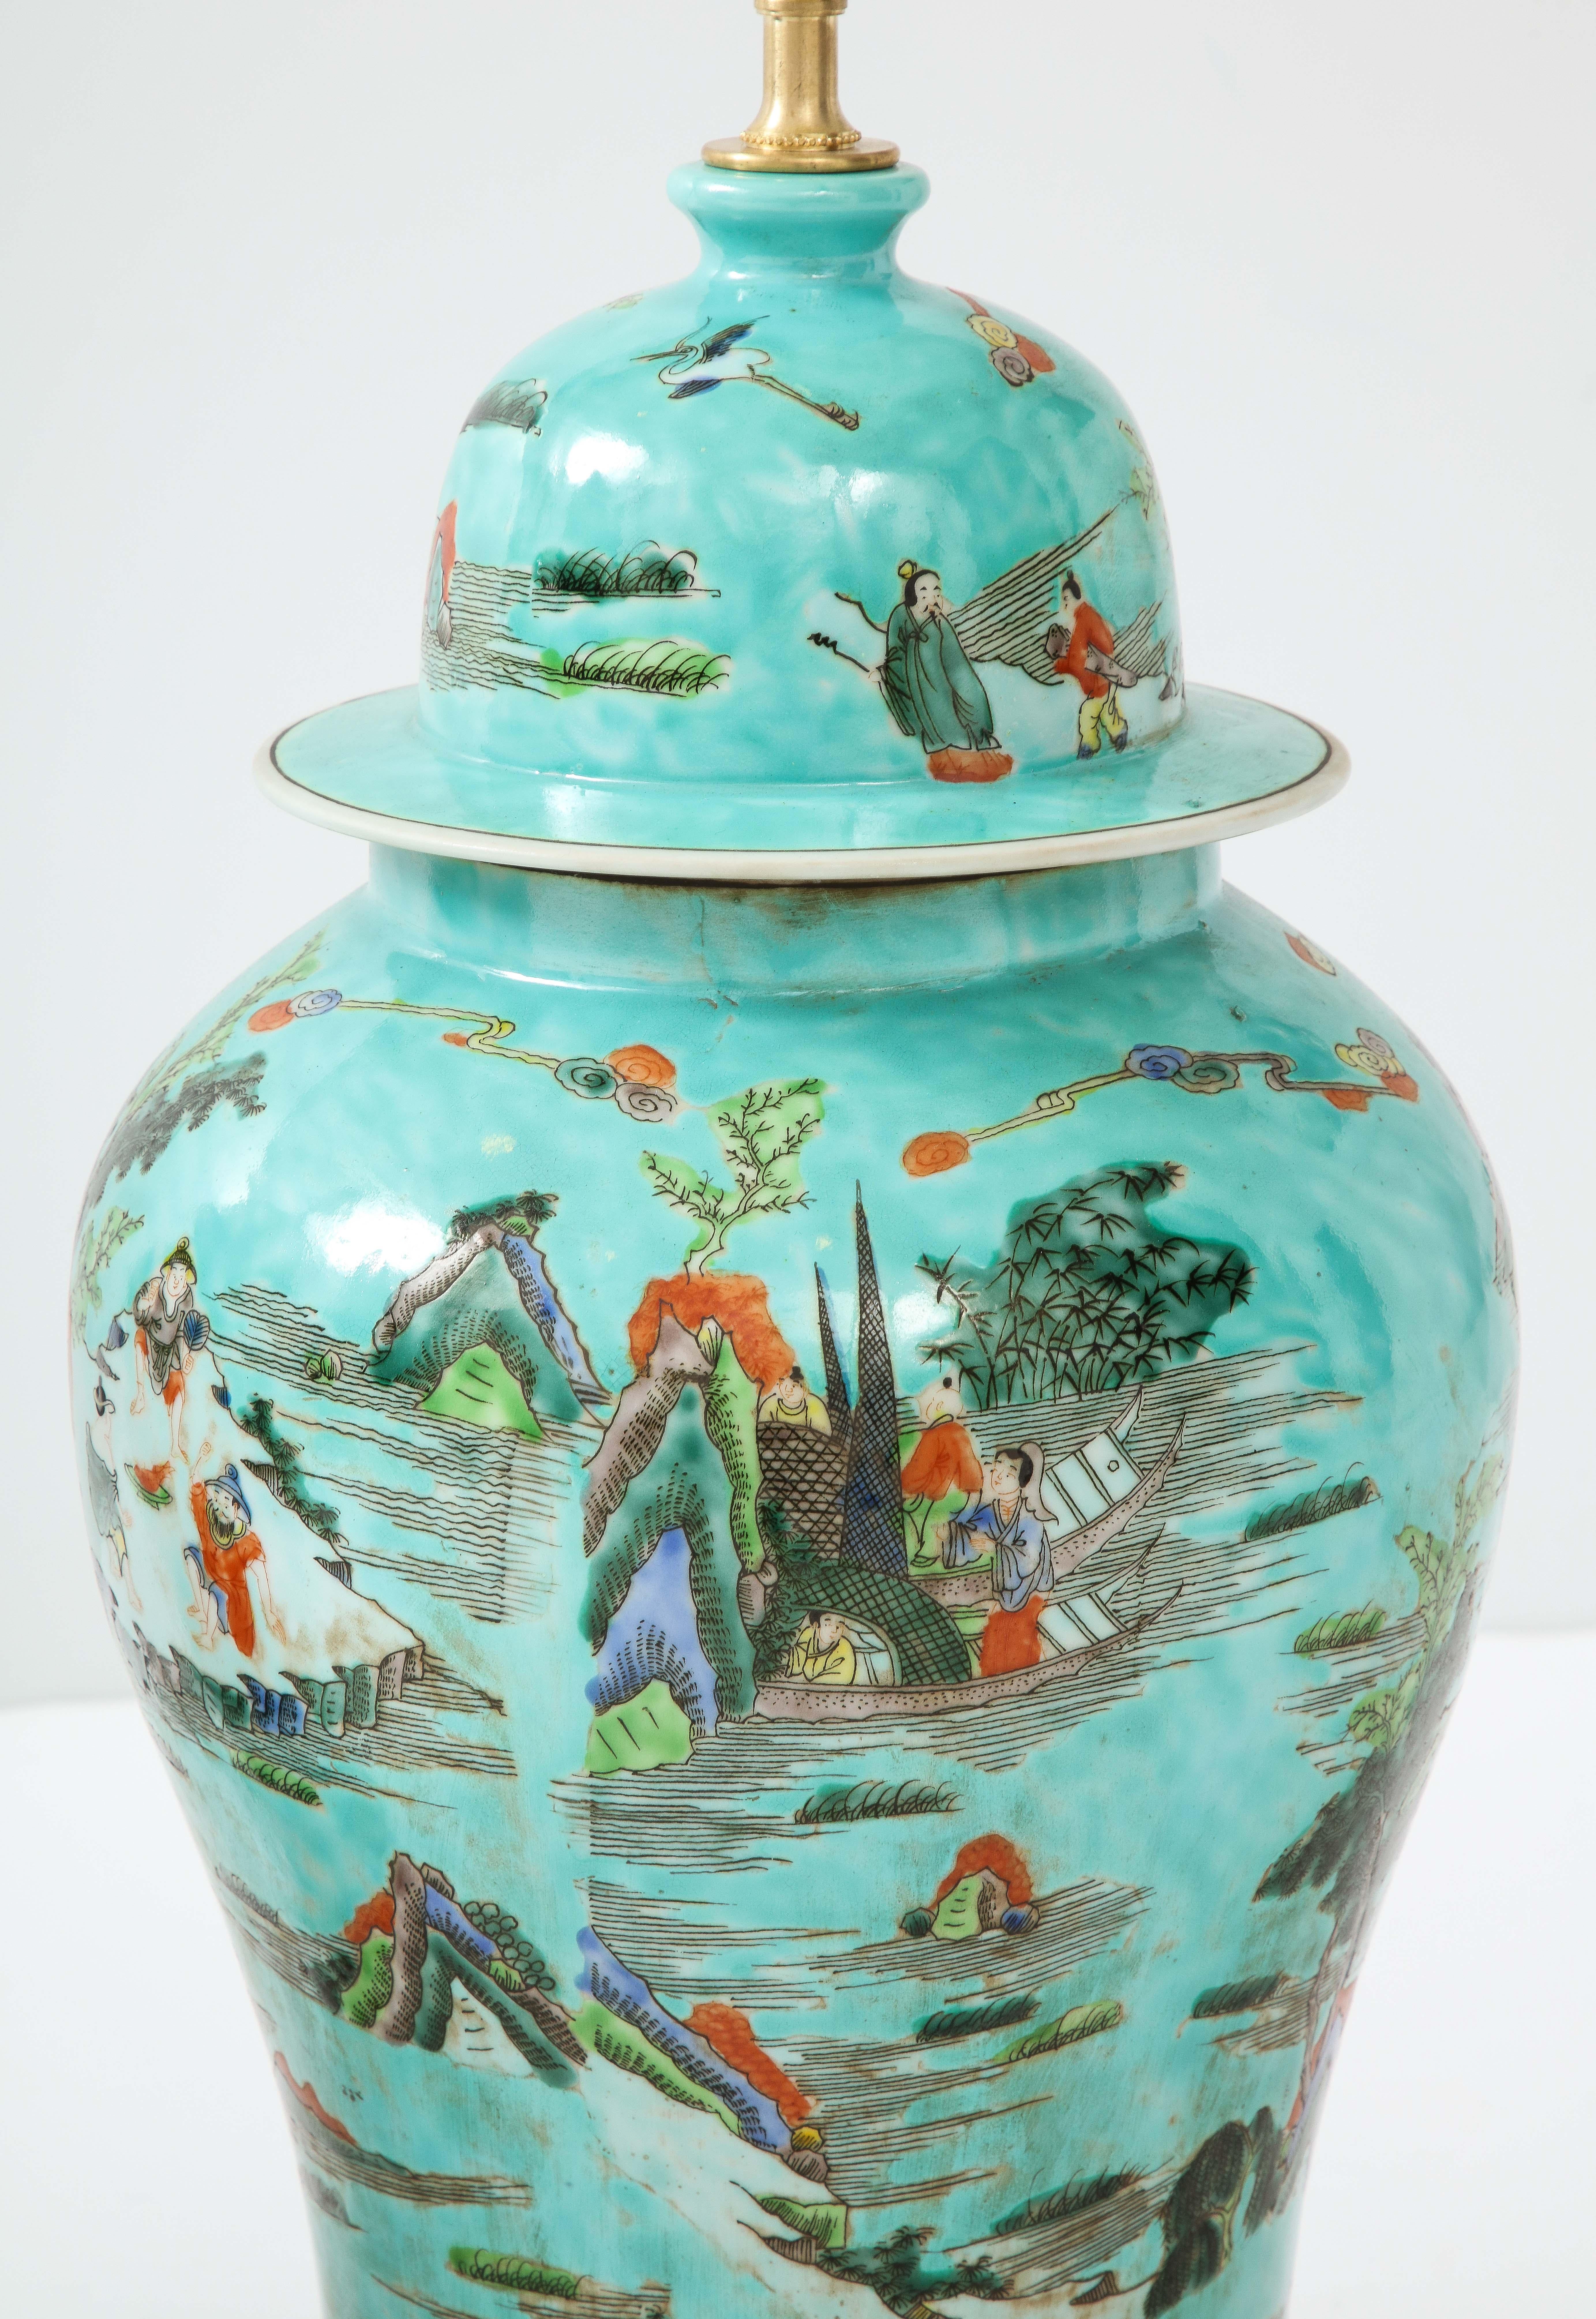 A pair of colorful and fanciful porcelain urns converted to lamps on a giltwood base. The ground color is a beautiful turquoise decorated with a colorful Chinoiserie inspired scene--a great way to add vibrant color to a room.